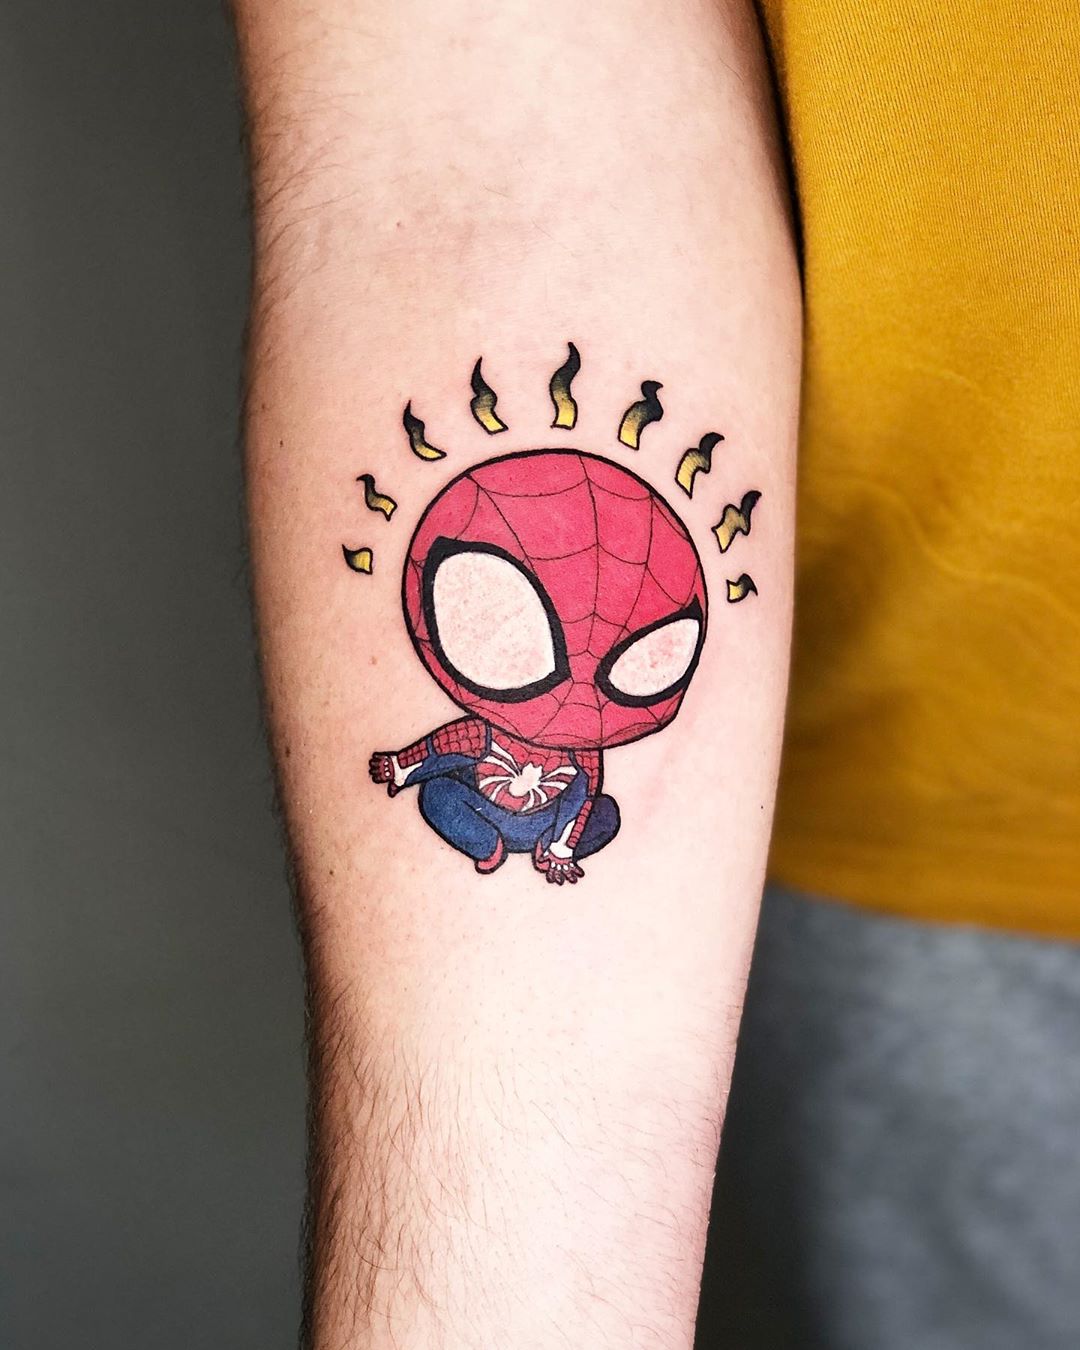 New SpiderMan tattoo done by Todd Wilson Artistic Ink in Anderson SC   rtattoos